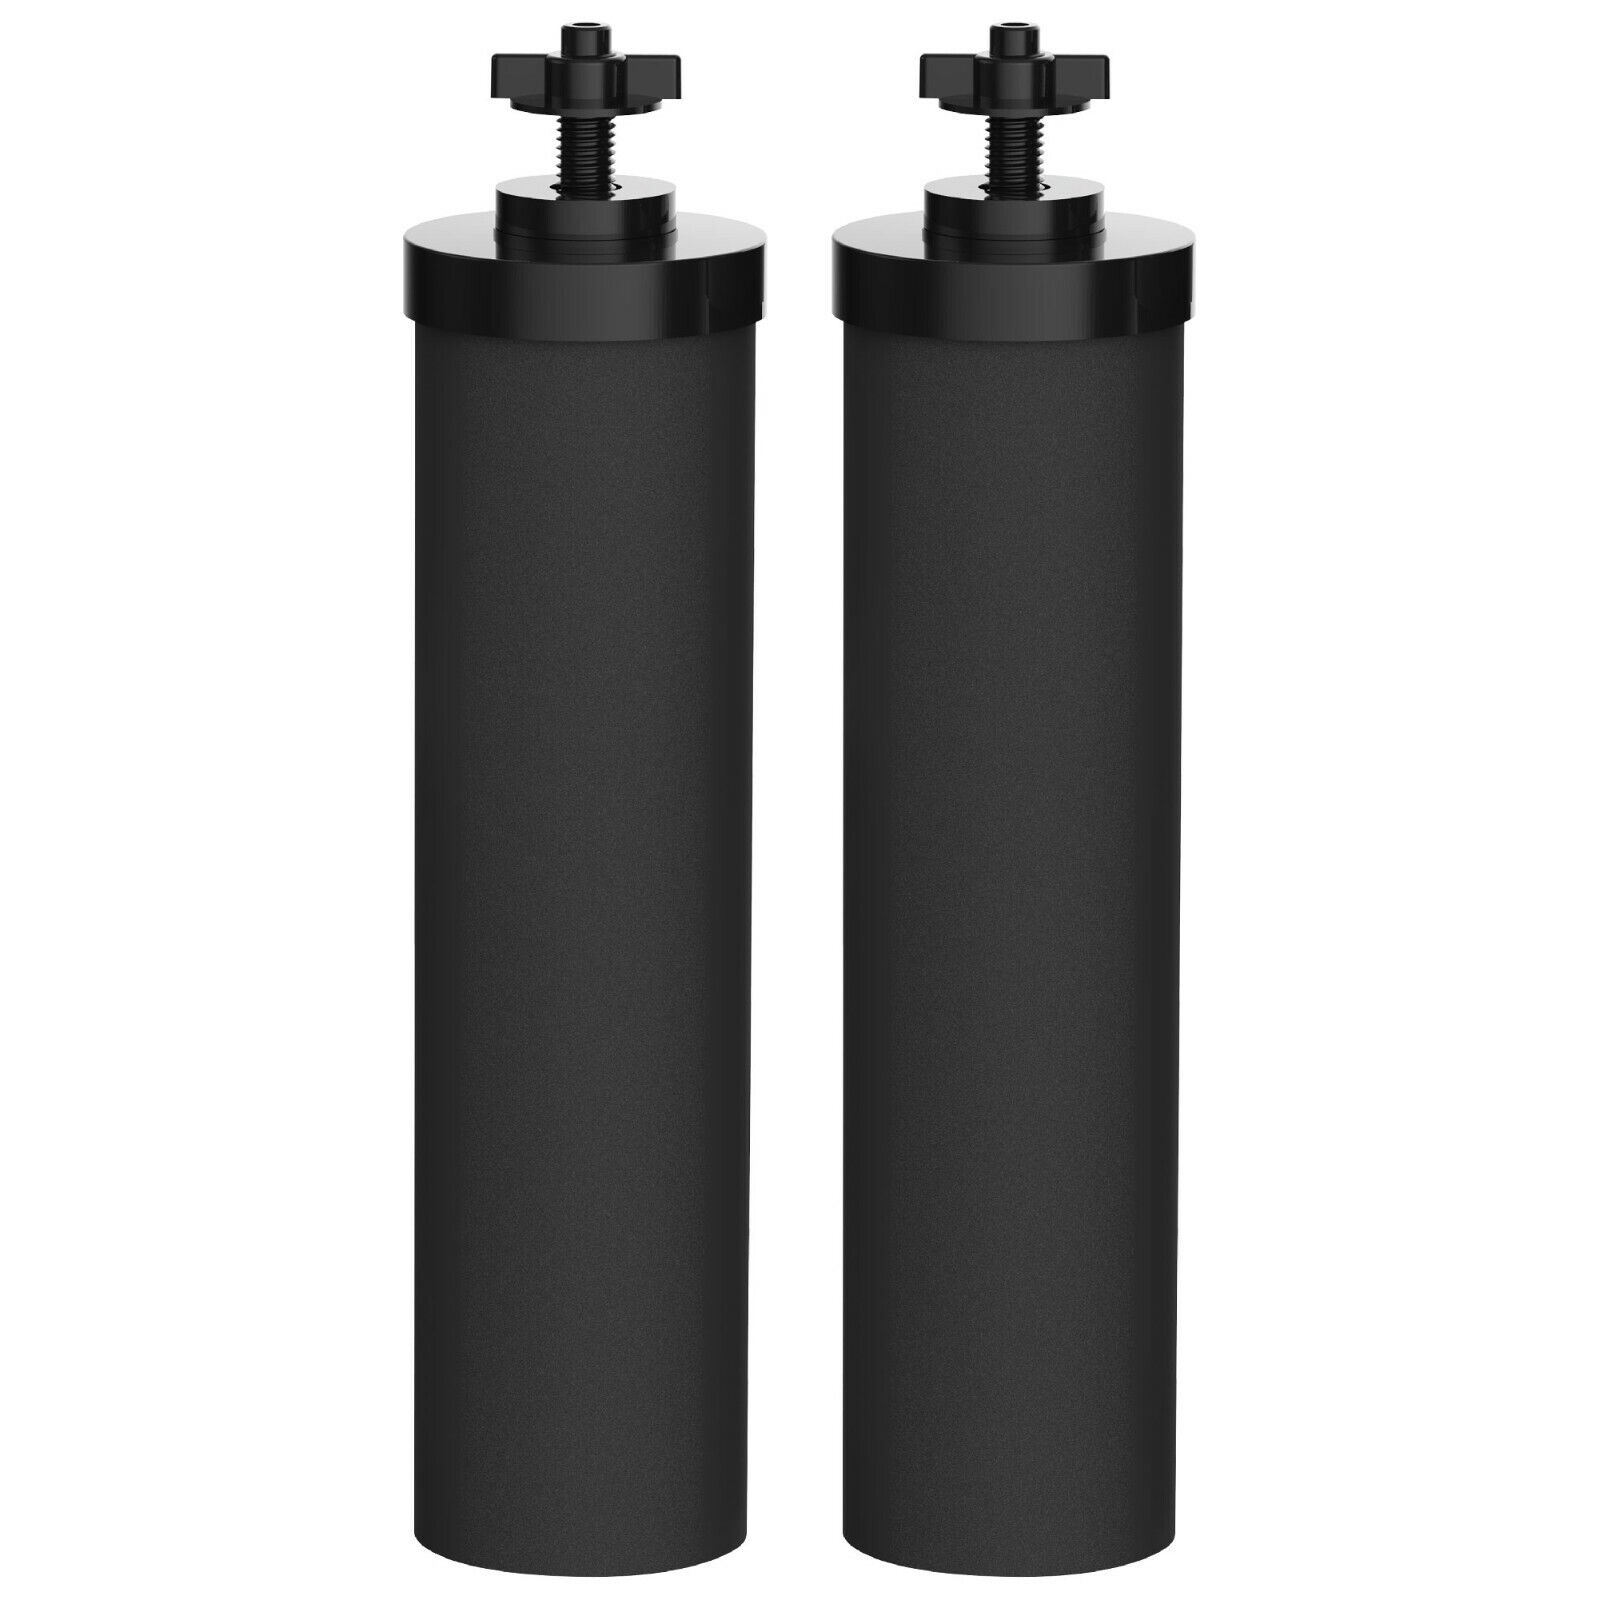 AQUA CREST Water Filter, Replacement for BB9-2 Black Purification Elements